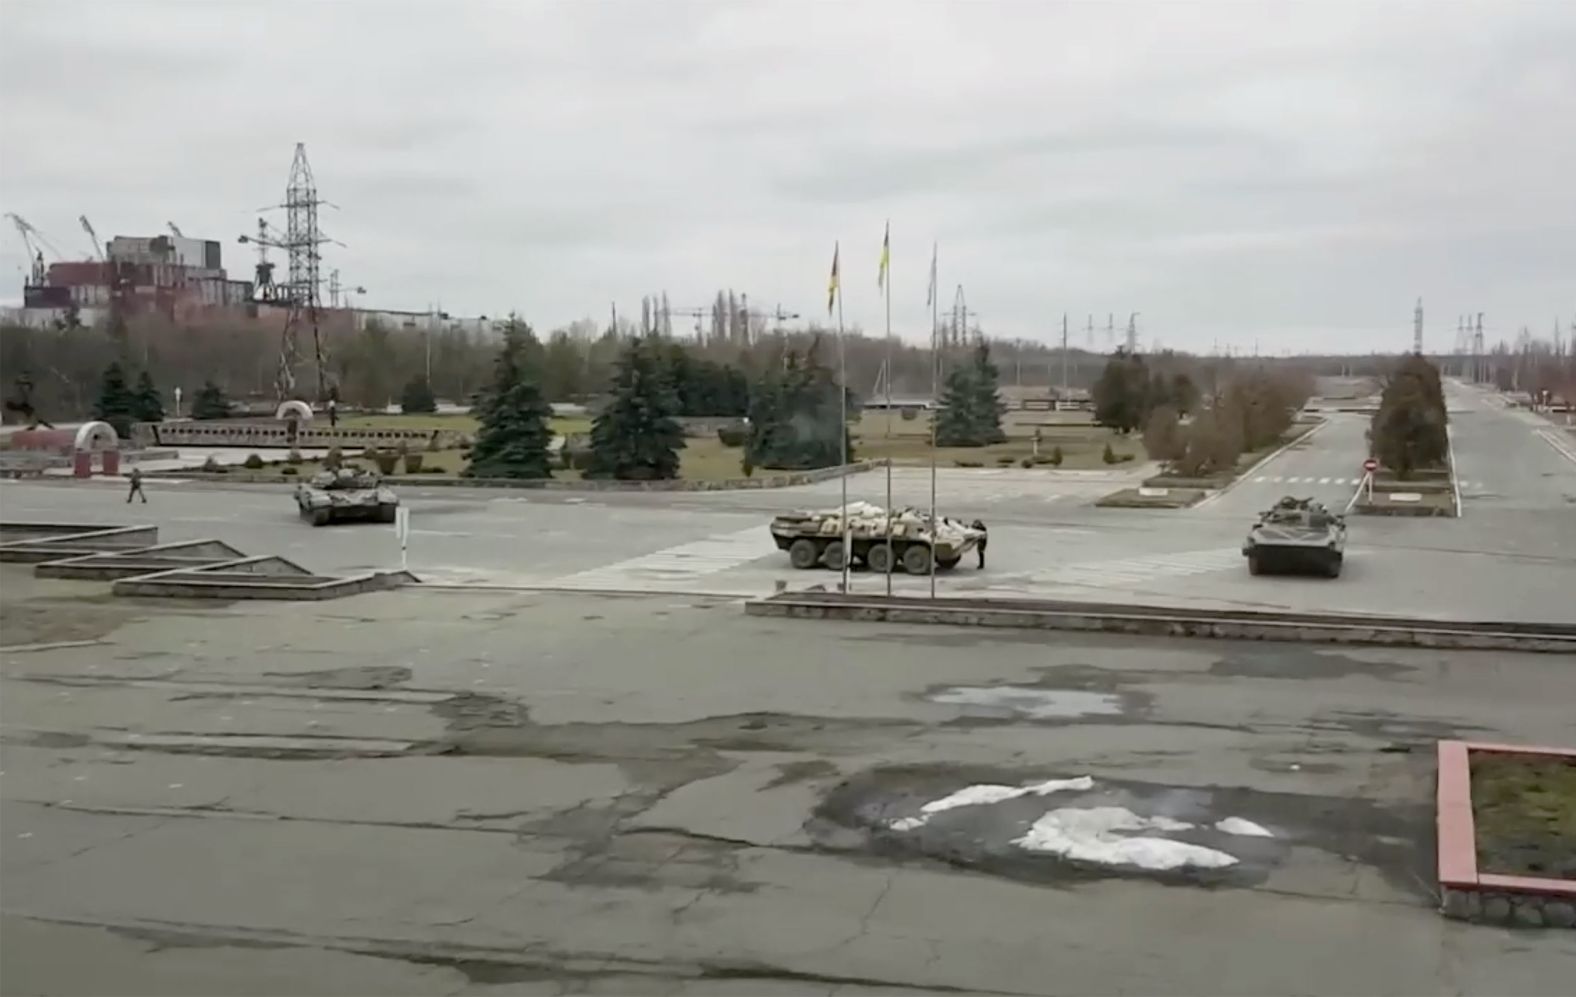 Russian military vehicles are seen at the Chernobyl power plant near Pripyat, Ukraine, on February 24. Russian forces <a href="https://www.cnn.com/2022/02/24/europe/ukraine-chernobyl-russia-intl/index.html" target="_blank">seized control of the the plant,</a> the site of the world's worst nuclear disaster.